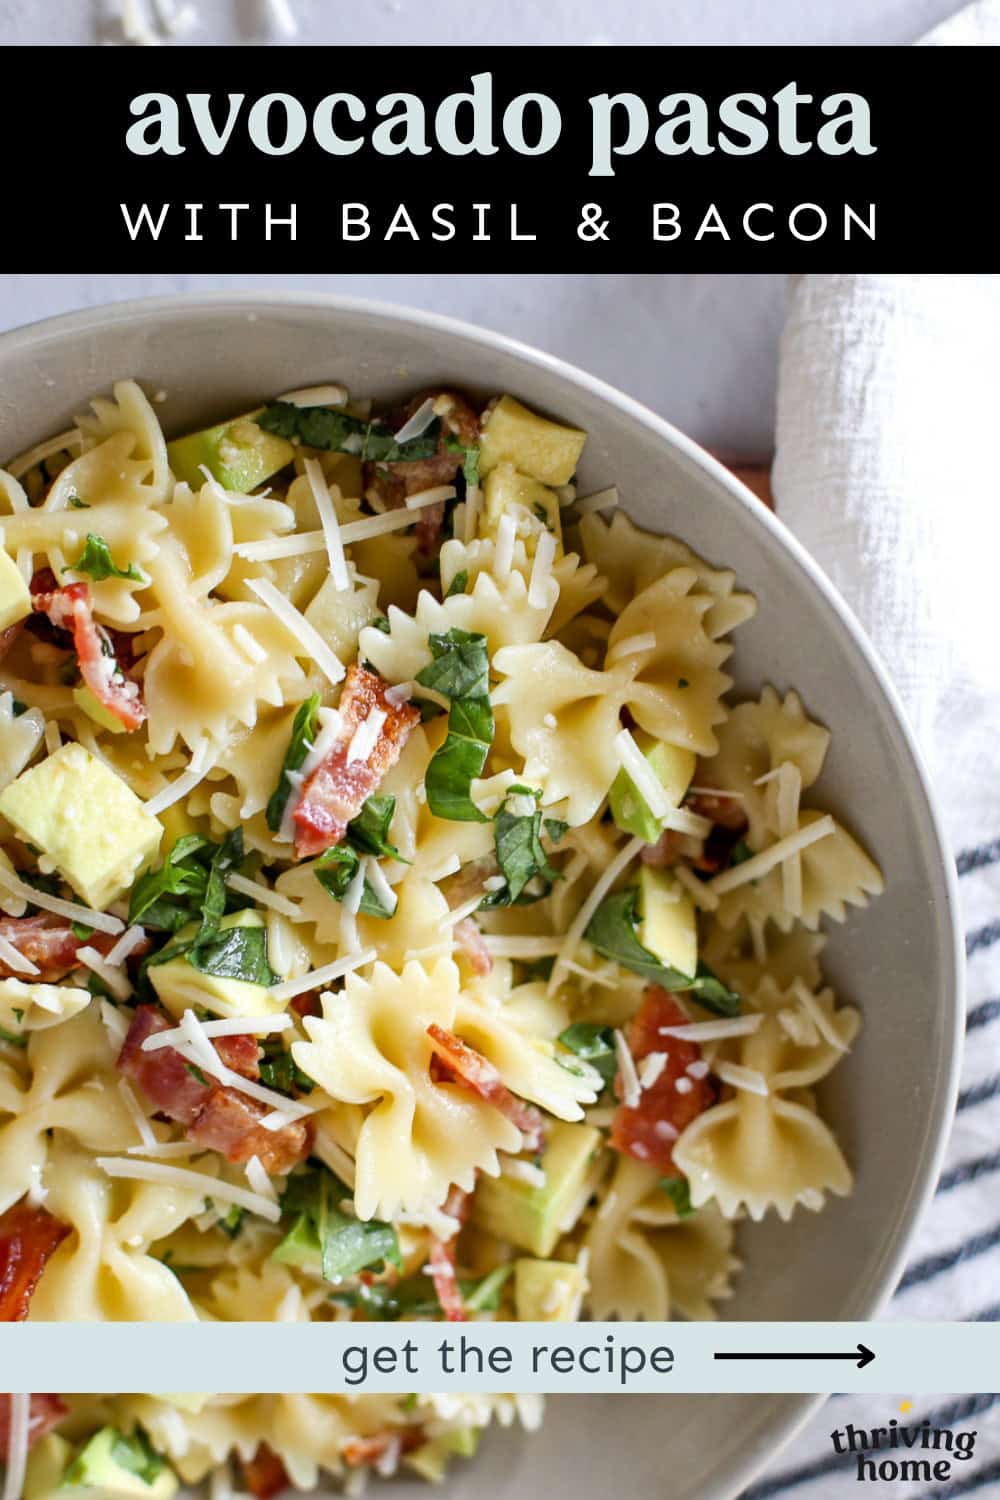 Avocado pasta with basil and bacon in a white bowl with shredded Parmesan on top.